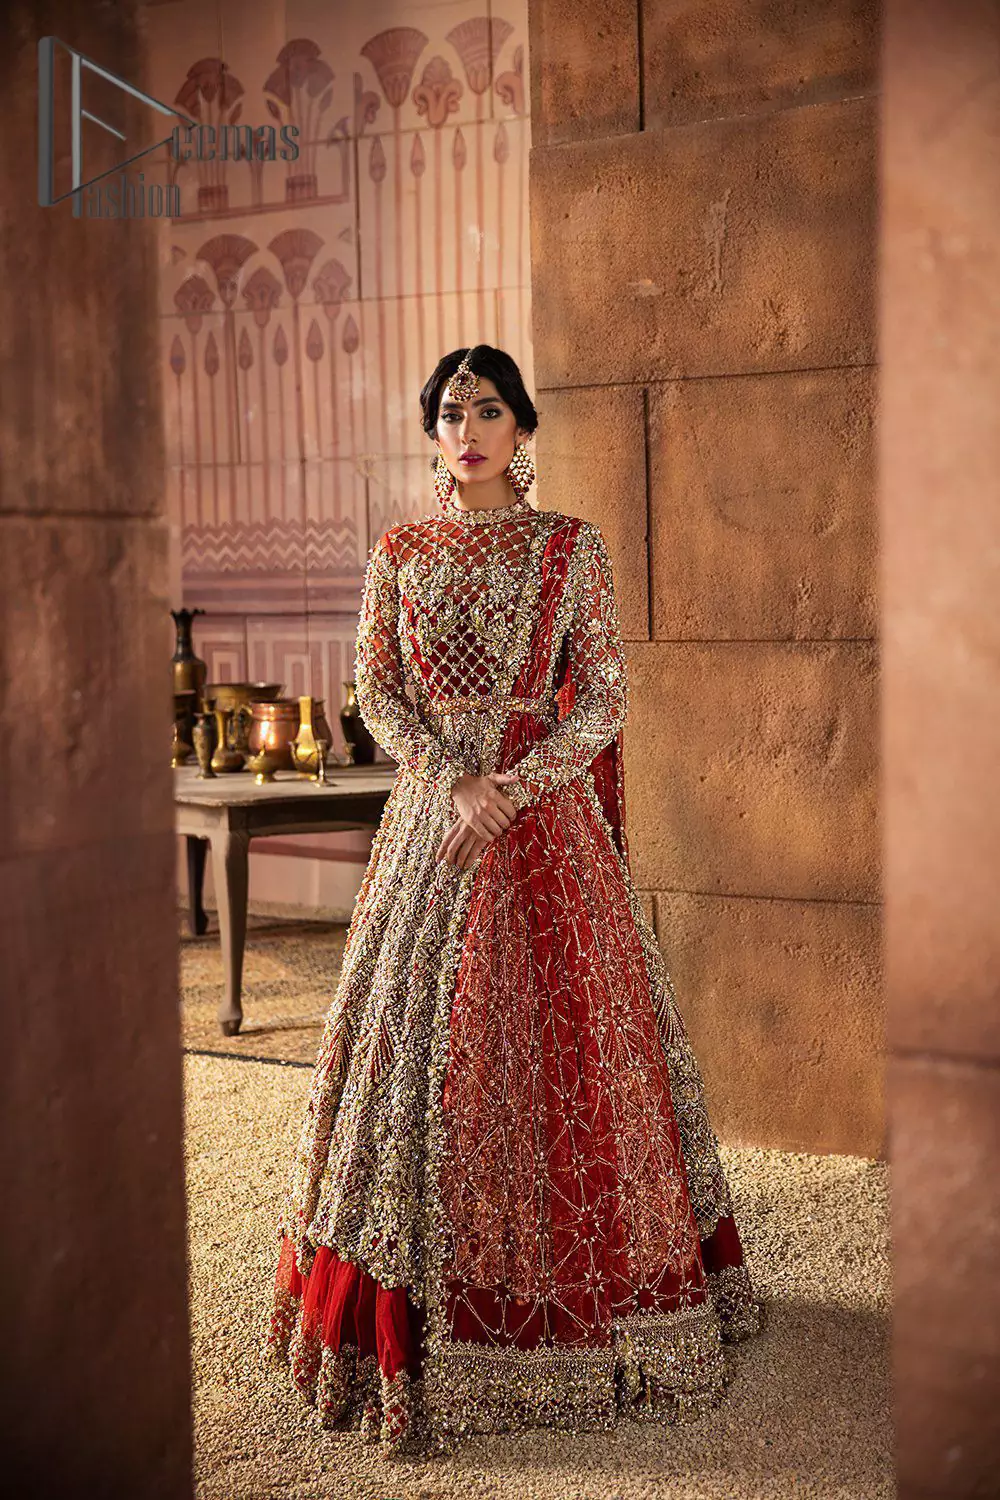 There are days in life when you fall in love with red love tone. As every bride wants red for her big day so DeemasFashion presents a bright red maxi that is heavily ornamented with golden embroidery just to make you a relaxing and romantic bride. The maxi is prominent with a jewel neckline which is added super aesthetics to your outfit. In addition to this, the full sleeves of maxi are just priceless and highlighted with kora, dabka, and tilla work. It is coordinated with the same color lehenga that's the border is heavily embellished with golden embroidery as well. Conclude this outfit with a bright red dupatta to add just the right amount to your bridal look.